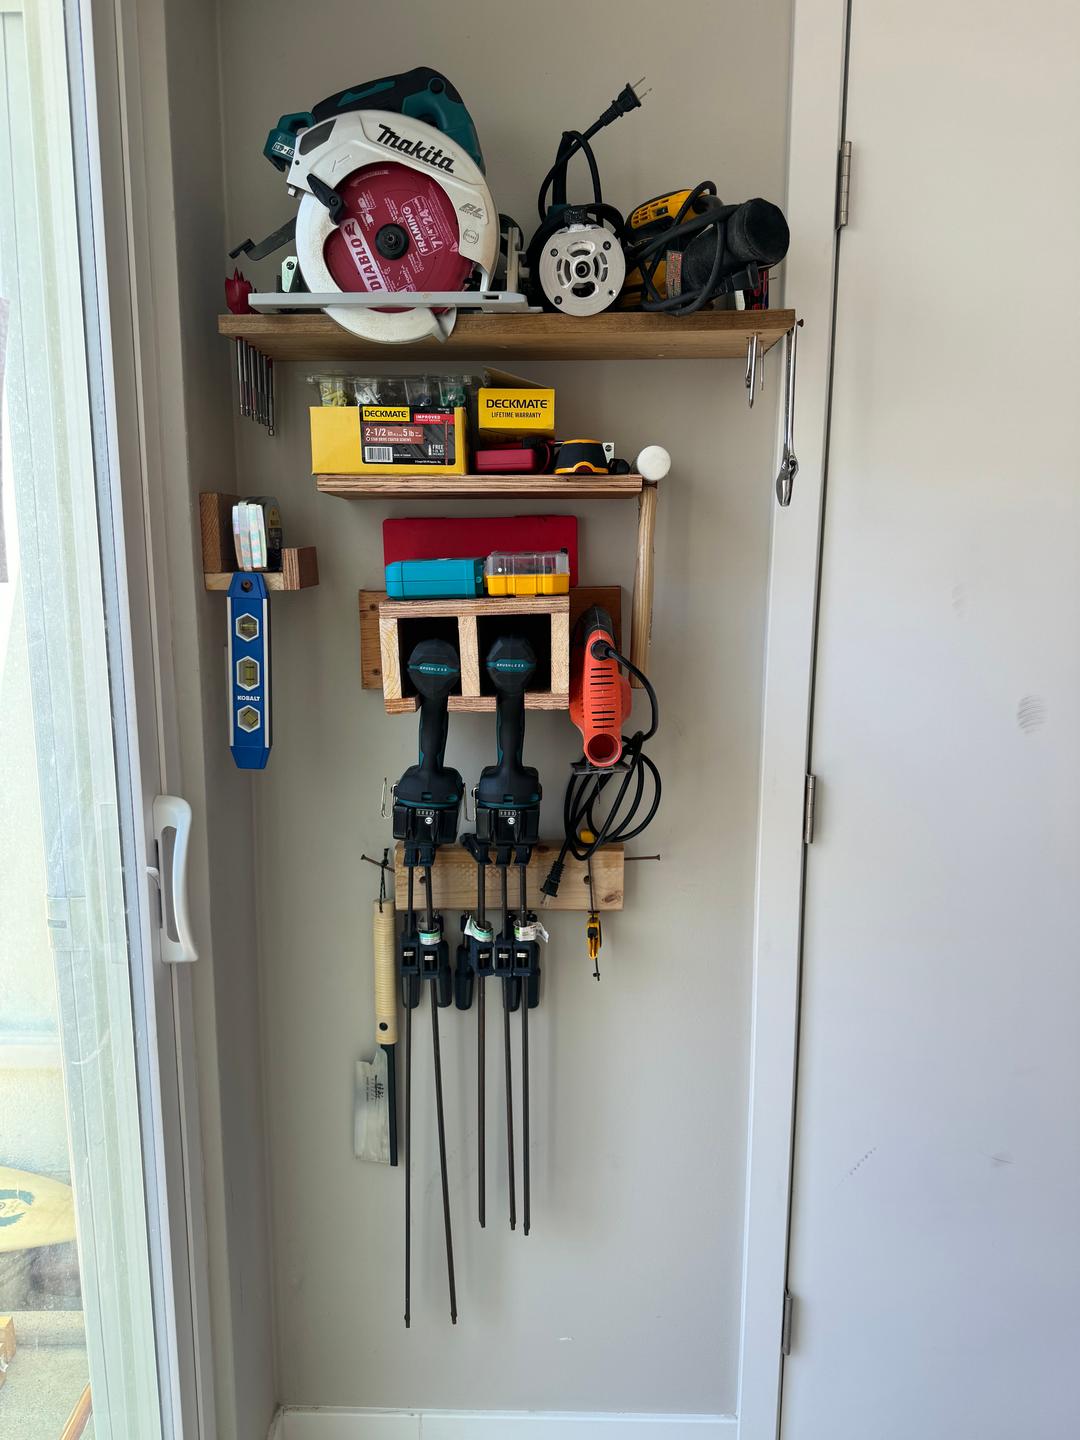 an image of a tool wall